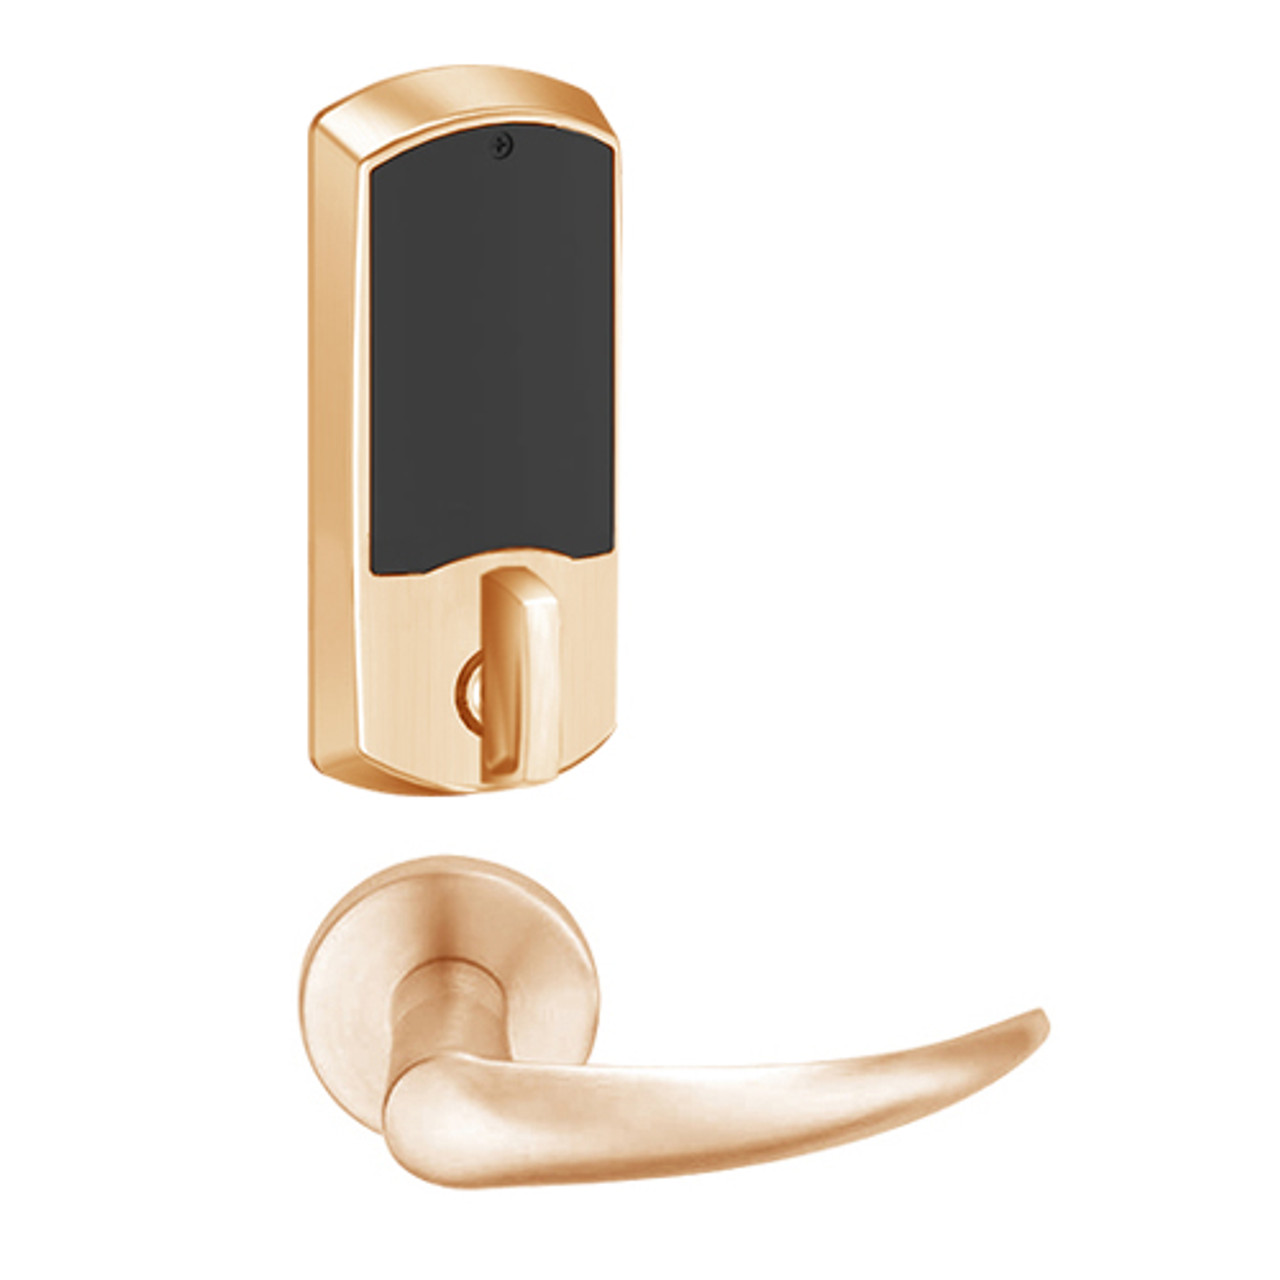 LEMD-GRW-BD-OME-612-00B Schlage Privacy/Apartment Wireless Greenwich Mortise Deadbolt Lock with LED and Omega Lever Prepped for SFIC in Satin Bronze